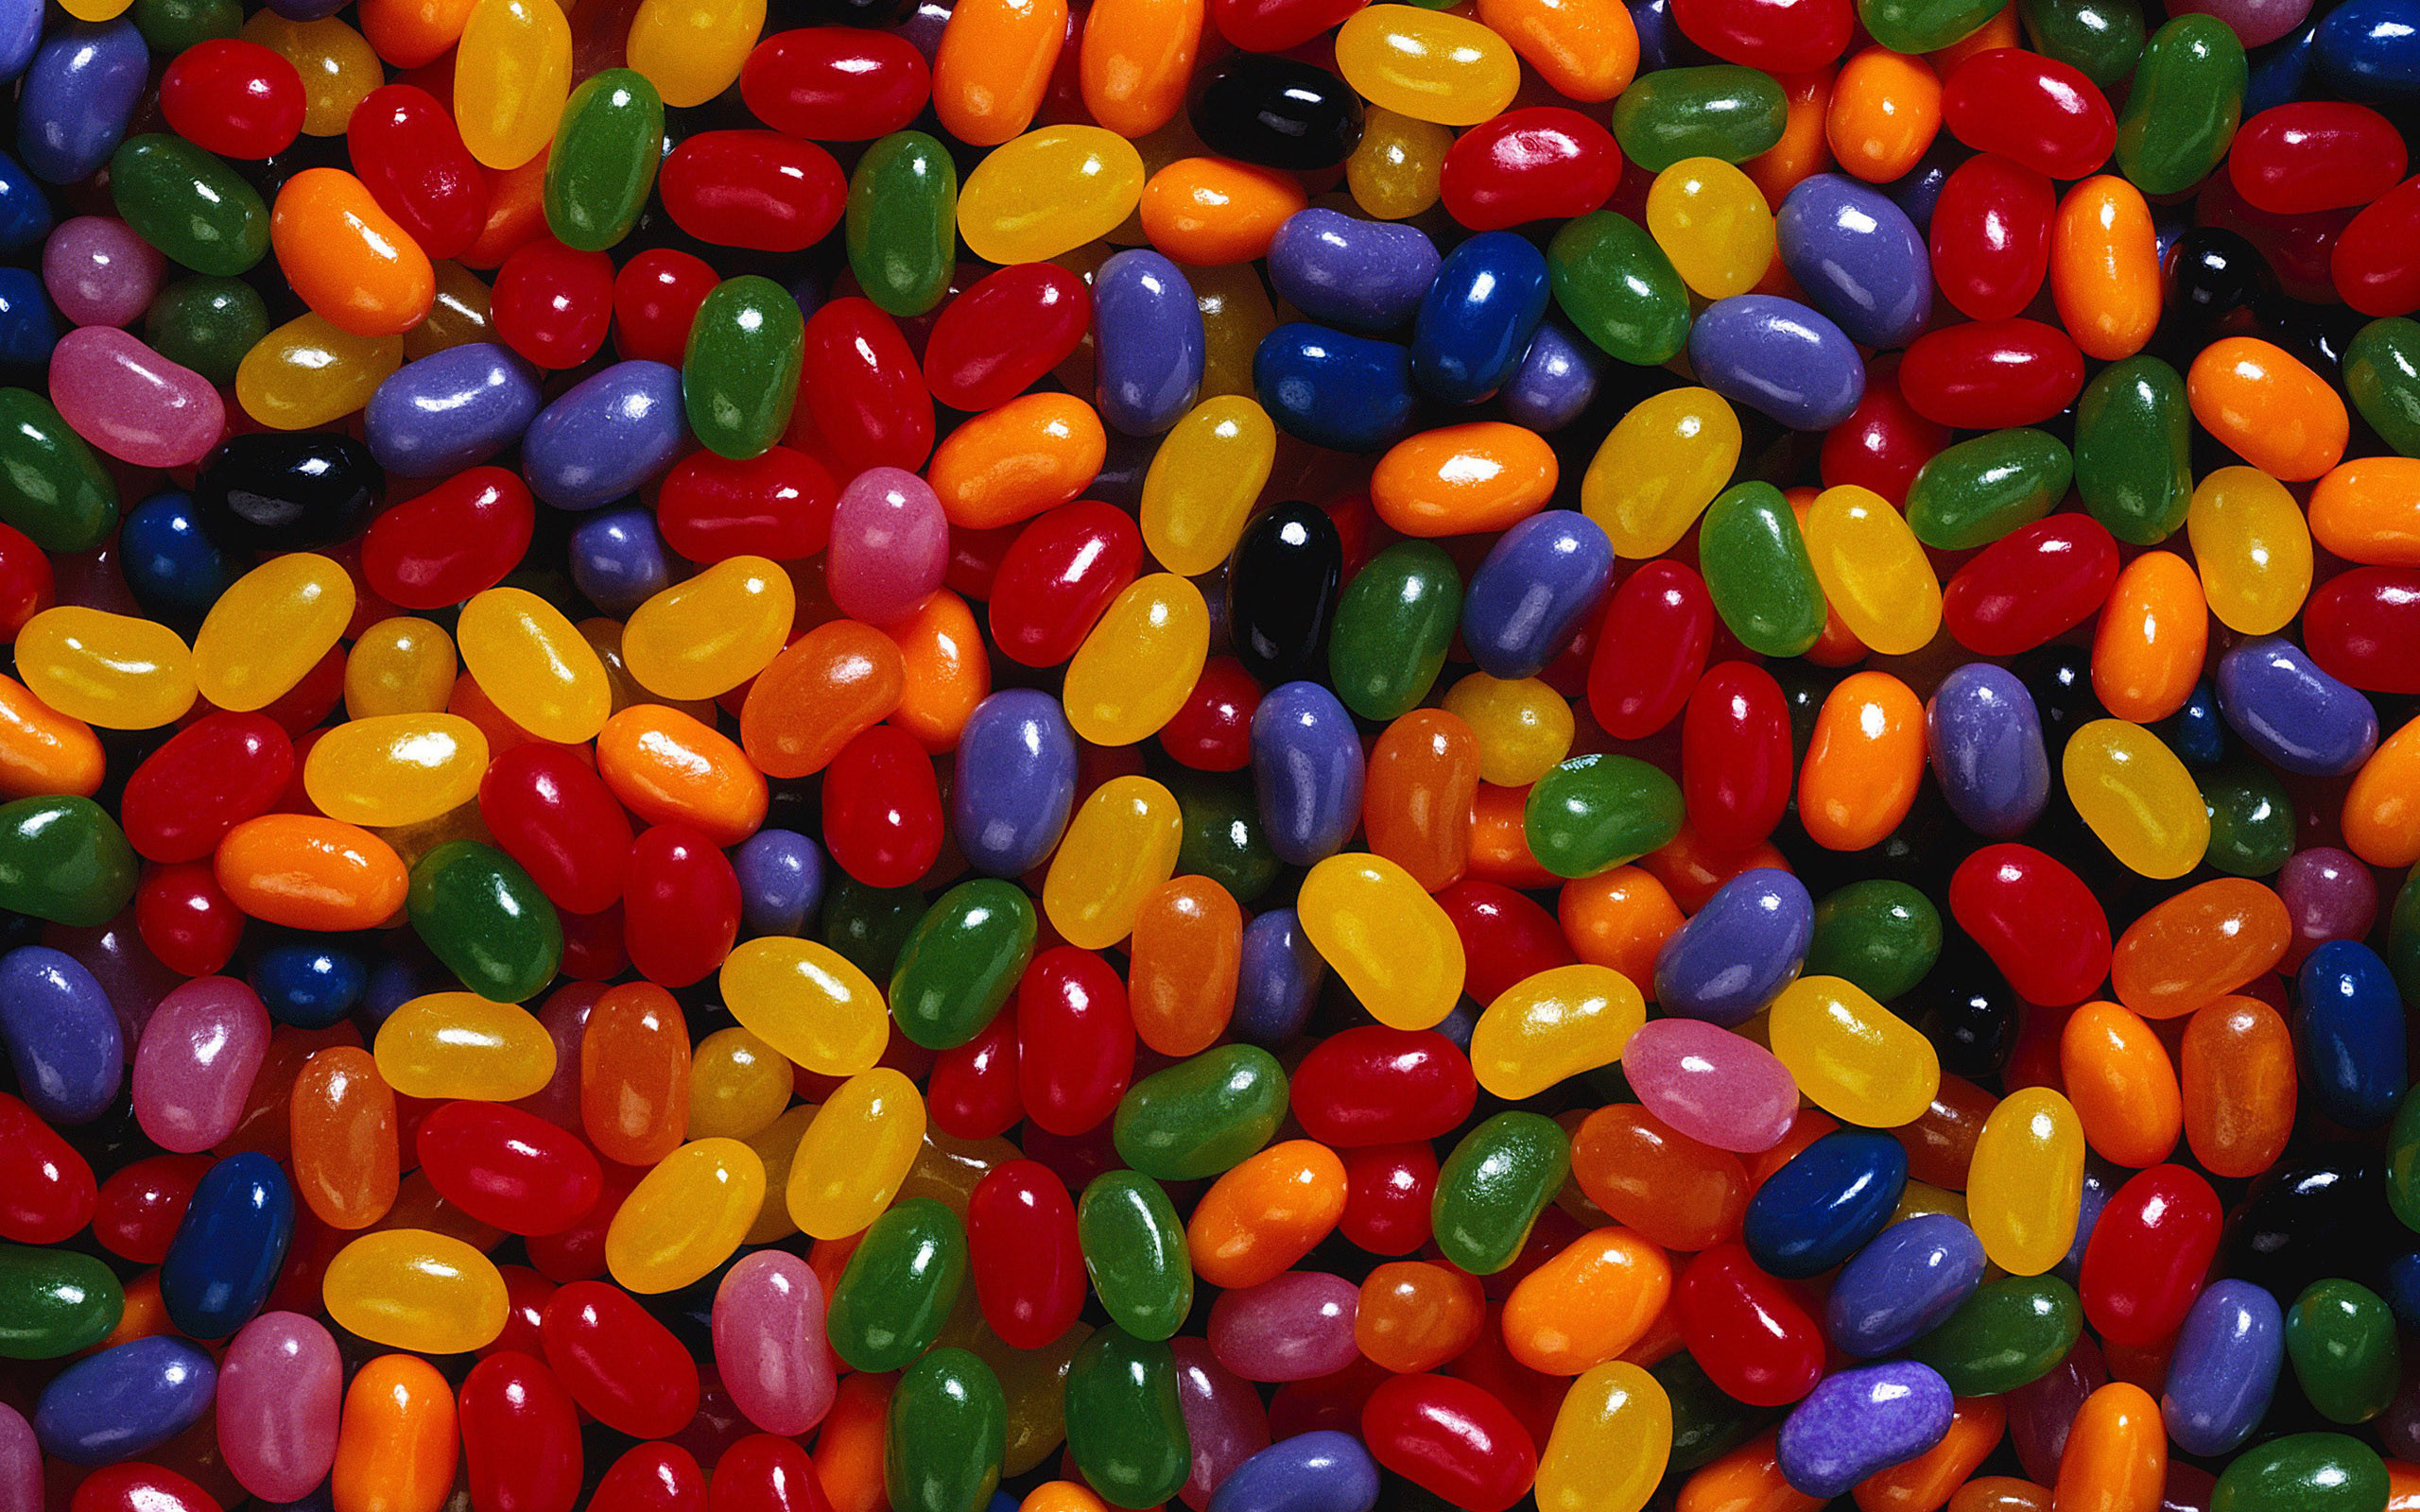 2560x1600 Candy Computer Wallpapers, Desktop Backgrounds |  | ID:367272